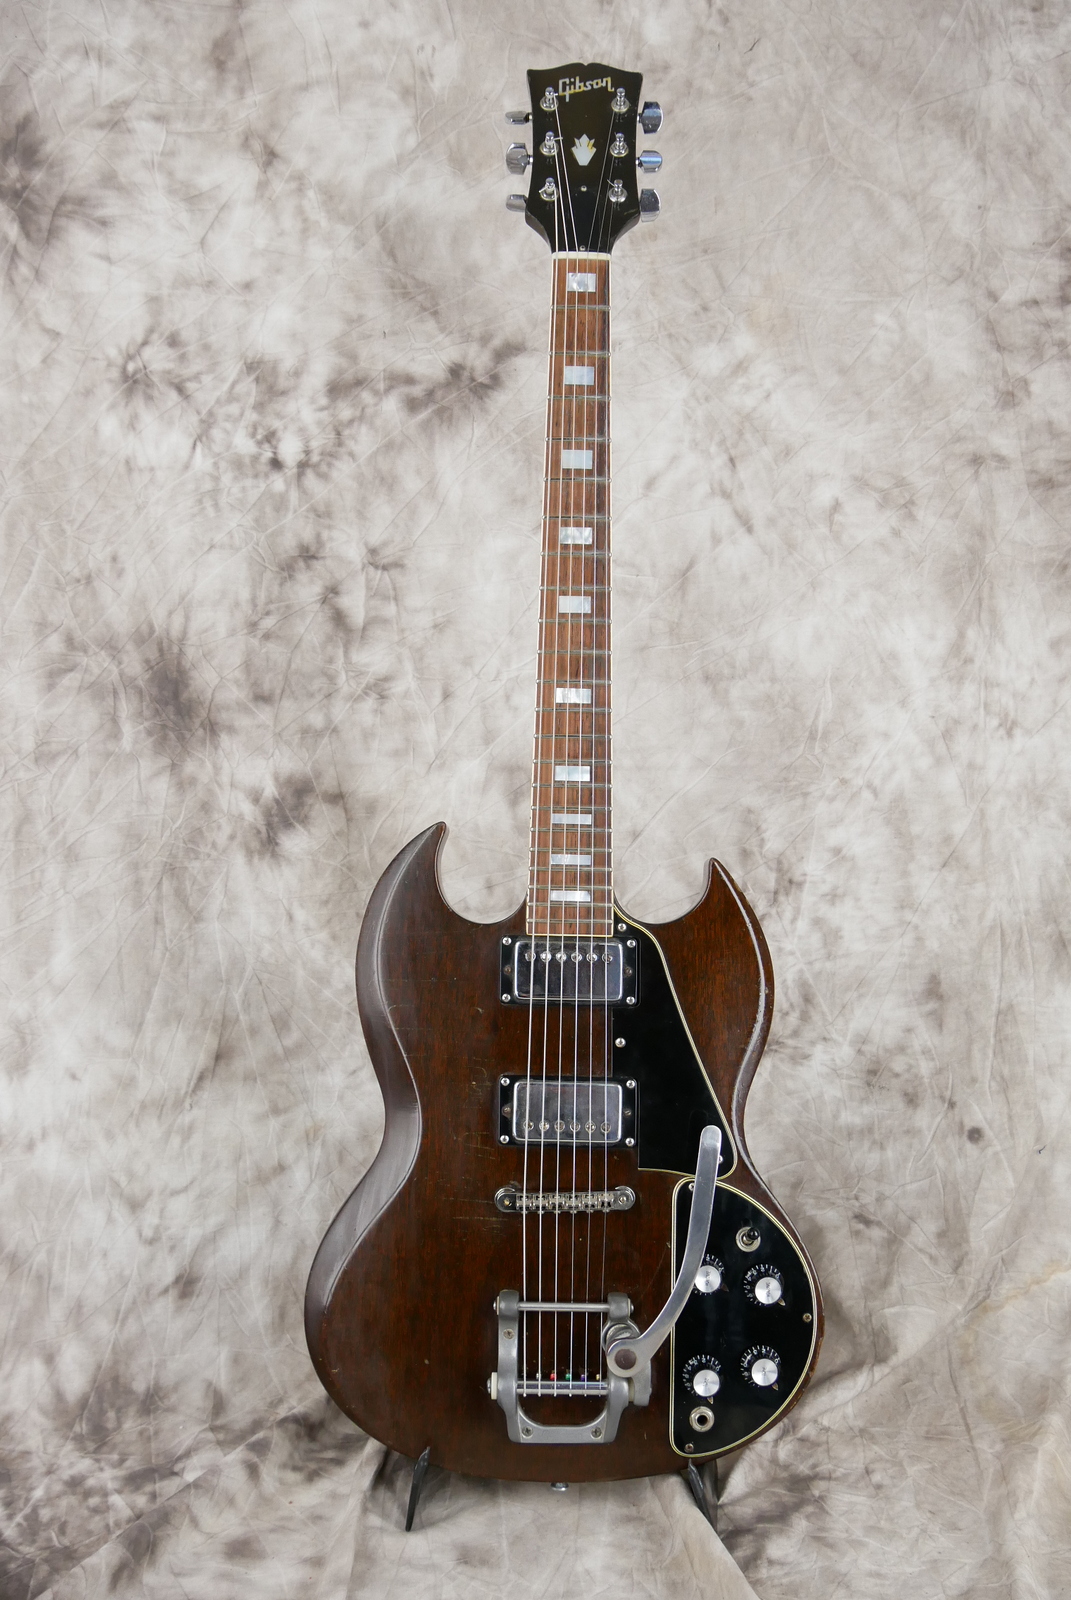 Gibson_SG_Deluxe_bigsby_1971_1972_walnut_cts-pots_1966-001.JPG